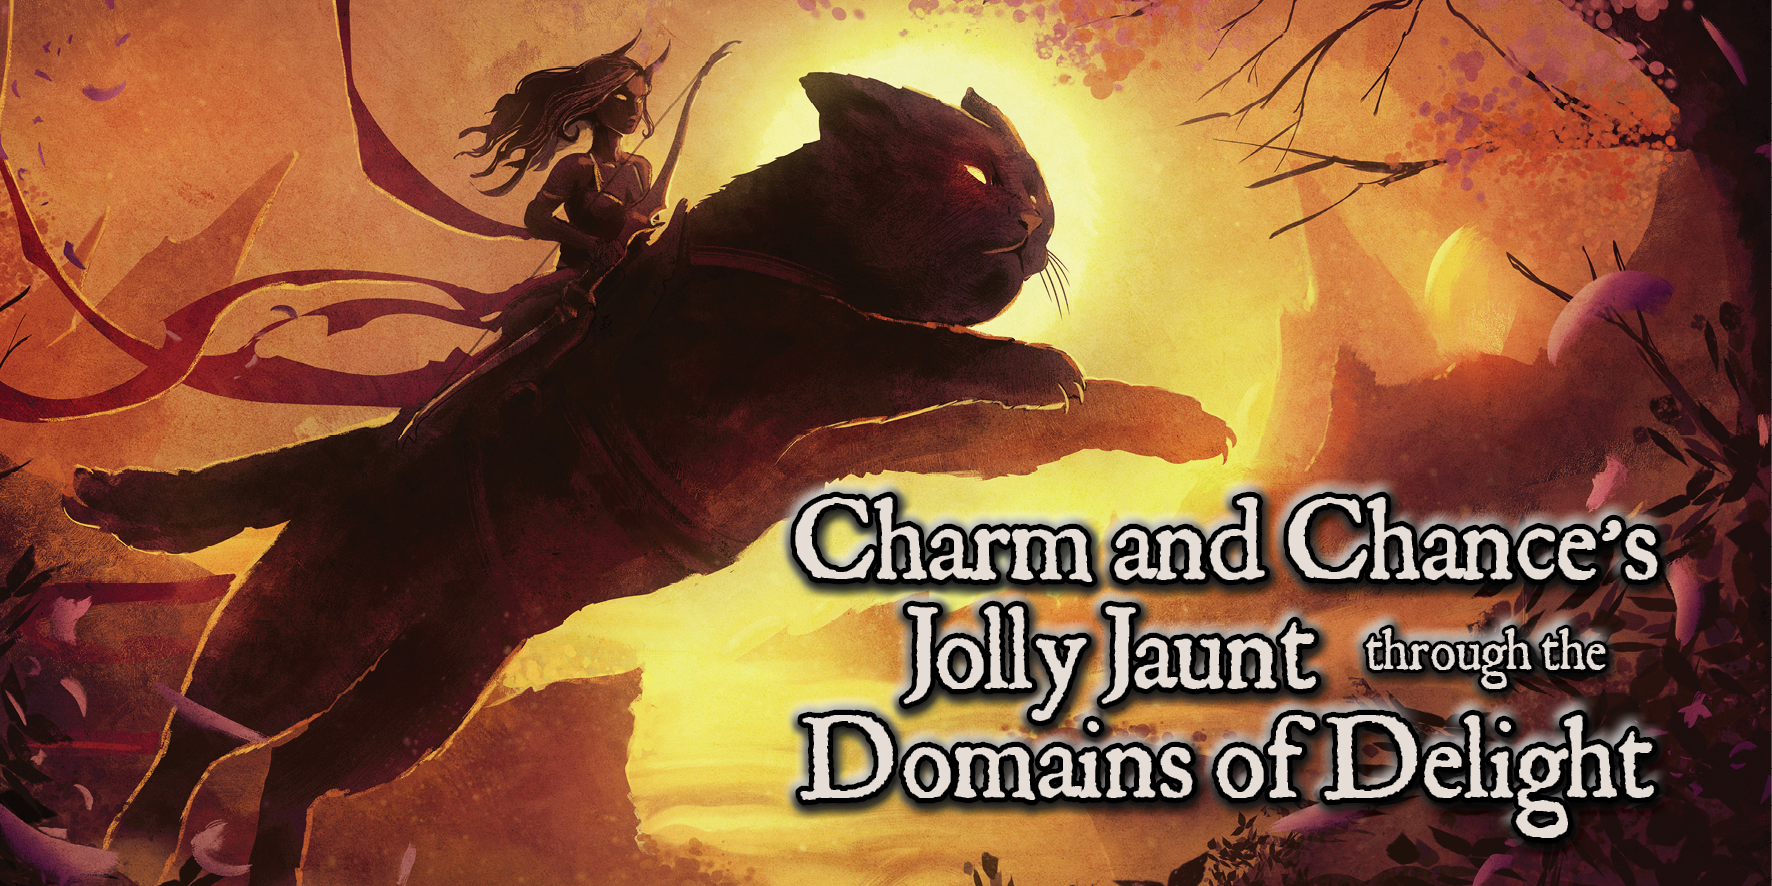 Charm and Chance’s Jolly Jaunt Through the Domains of Delight